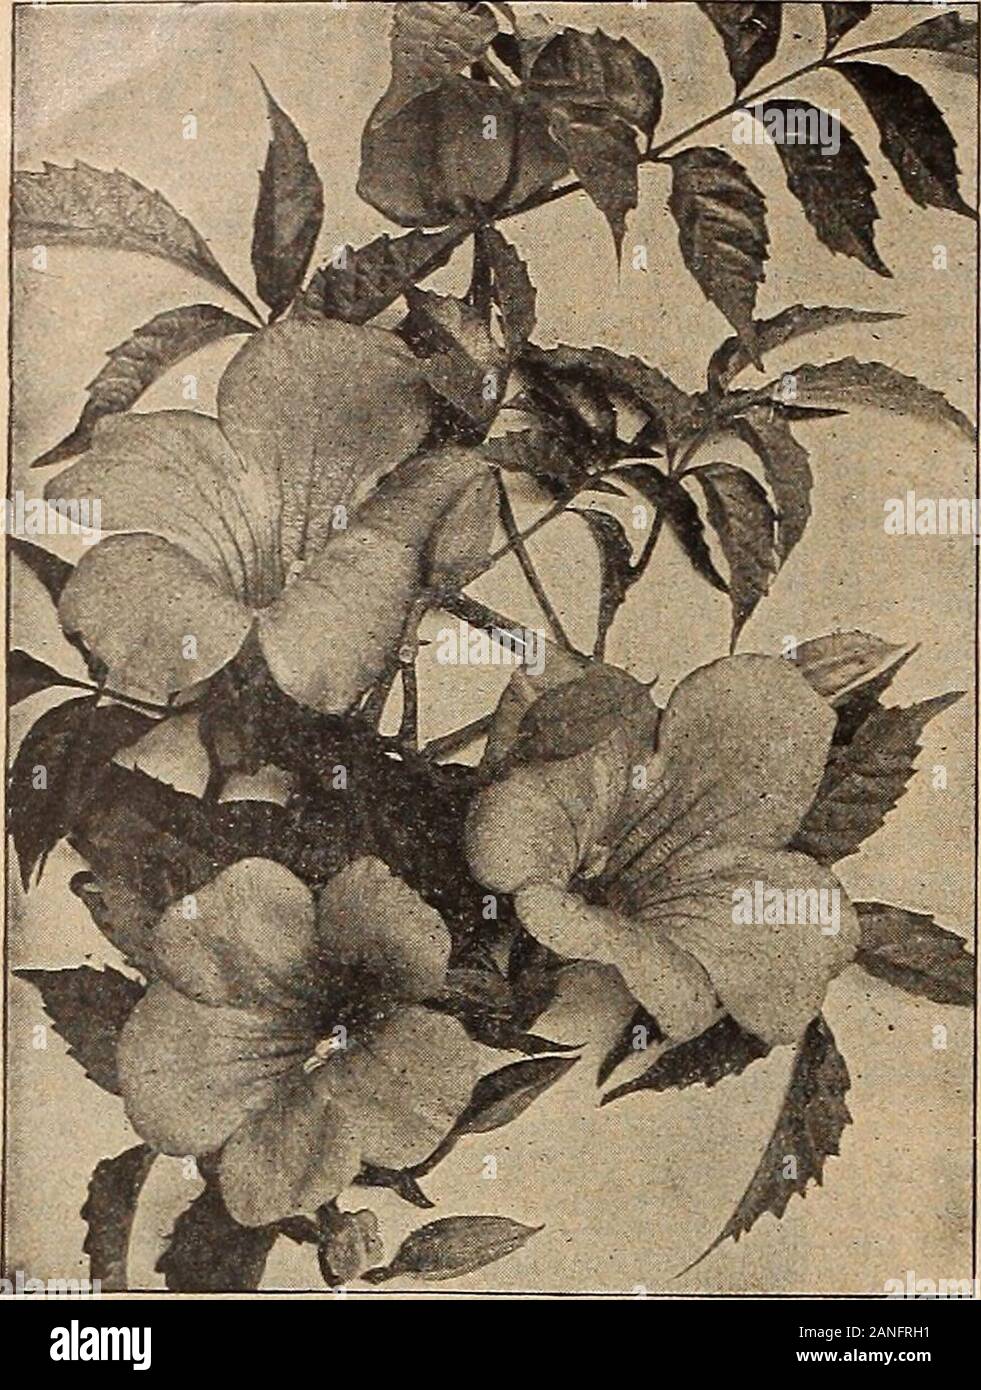 Dreer's mid-summer list 1918 . 58 HENRY A. DREER, PHILADELPHIA—HARDY CLIMBERS. BiGNONIA, OR TkVMPET ViNE BIGBIONIA (Trumpet Vine) For covering unsightly places, stumps, rockwork, or wherevera showy-flowering vine is desired, the Bignonias will be foundvery useful. The flowers are large, attractive, and borne pro-fusely when the plants attain a fair size.Orandiflora. Large flowers of orange-red. 50 cts. each; $5.00 per doz.Radicans. Dark red, orange throat, free blooming and very hardy. 30 cts. each; $3.00 per doz. CEI.ASTRUS SCANDENS (Bitter Sweet, or Wax Work) One of our native climbing plant Stock Photo